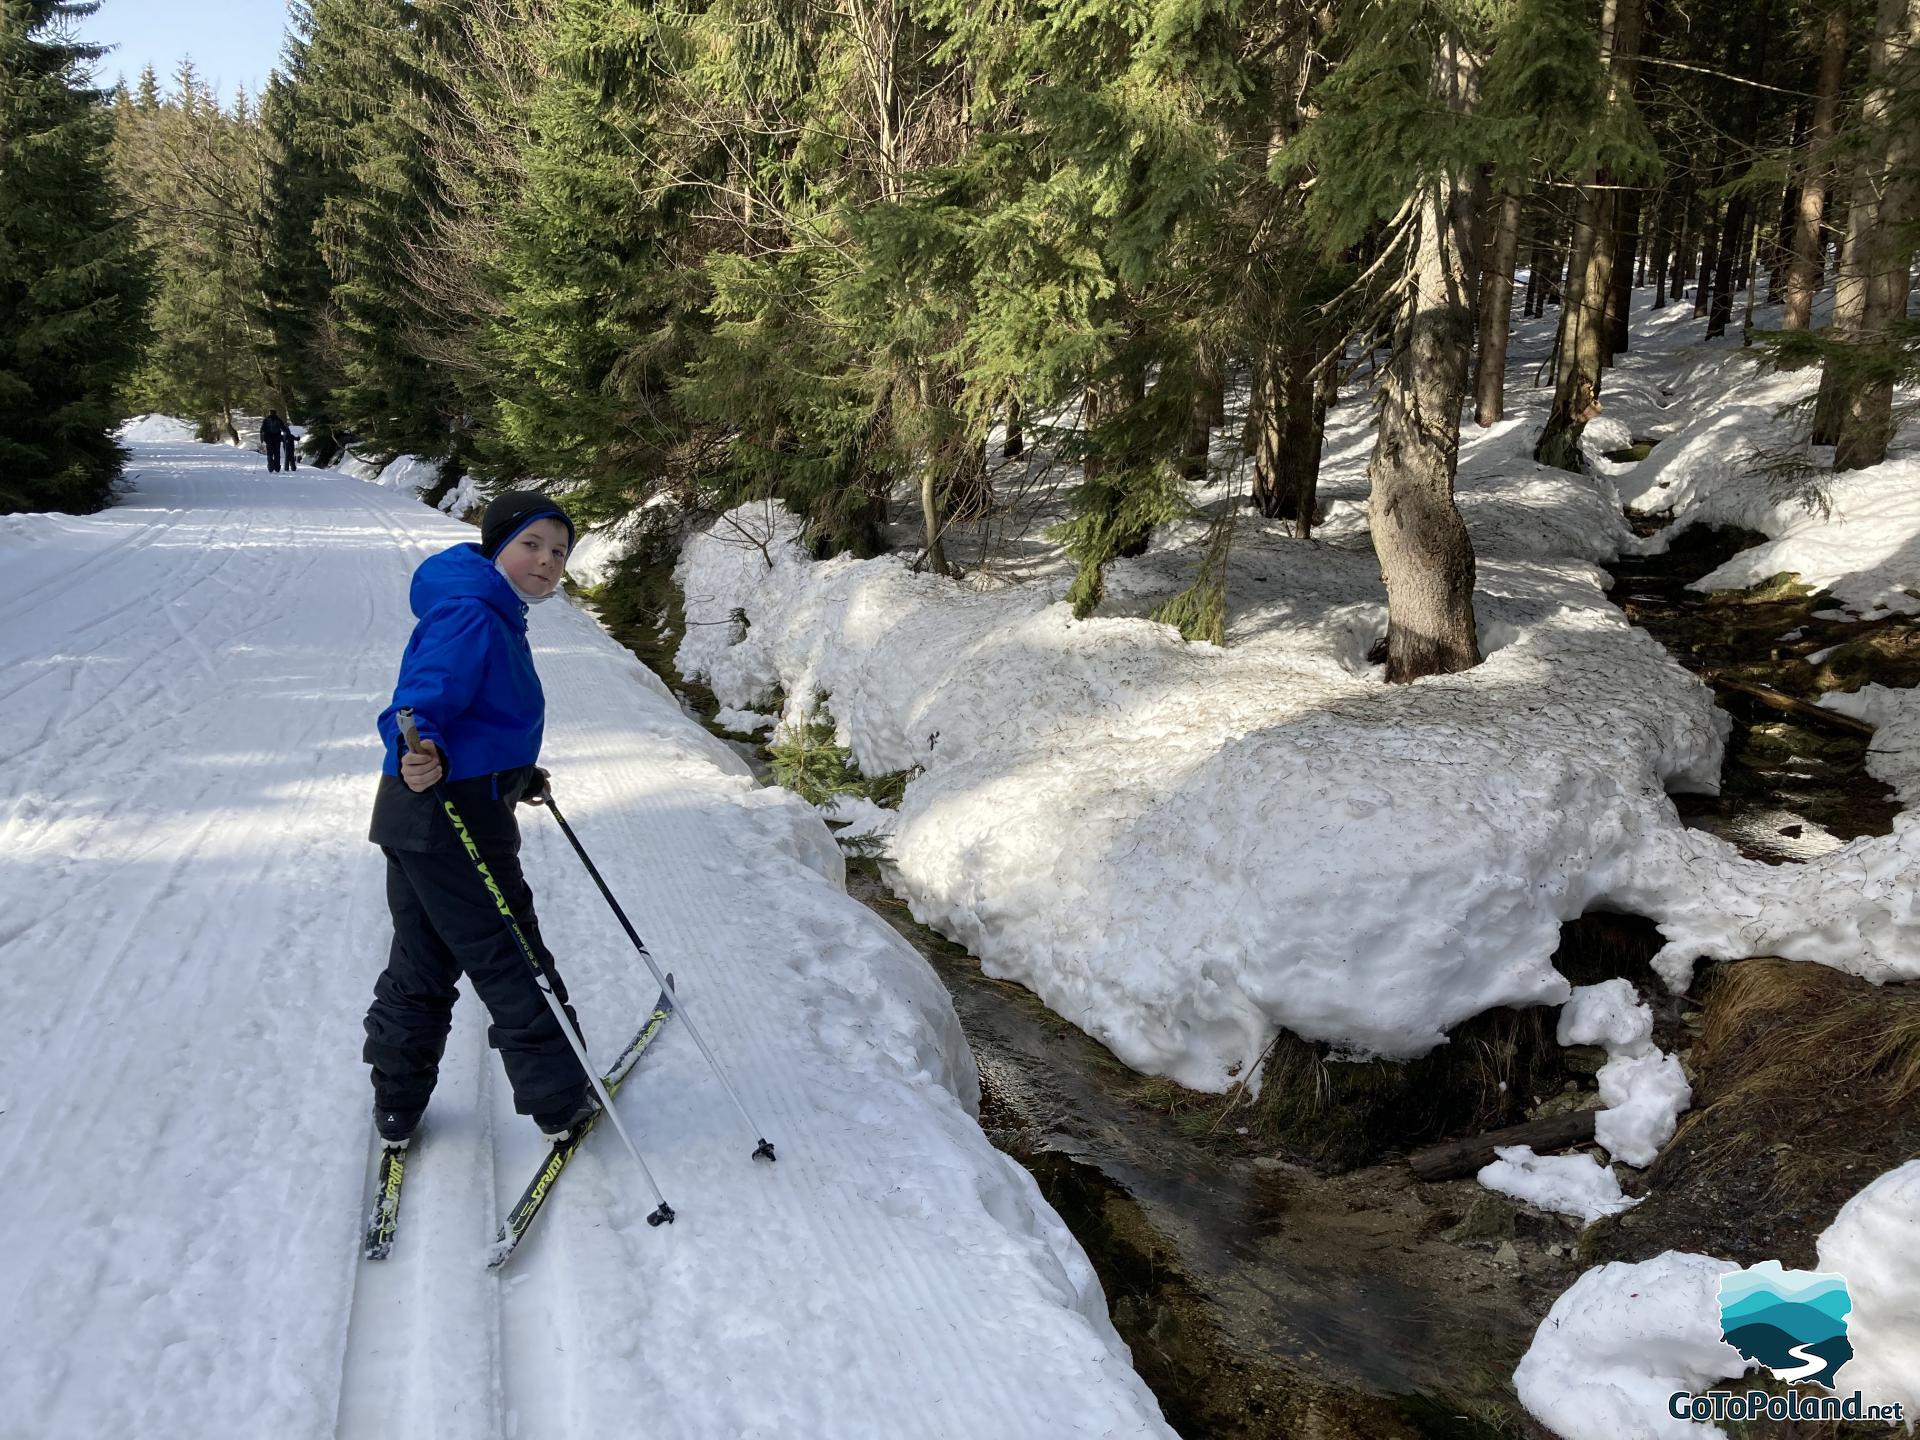 A boy on cross-country skis on a snowy trail